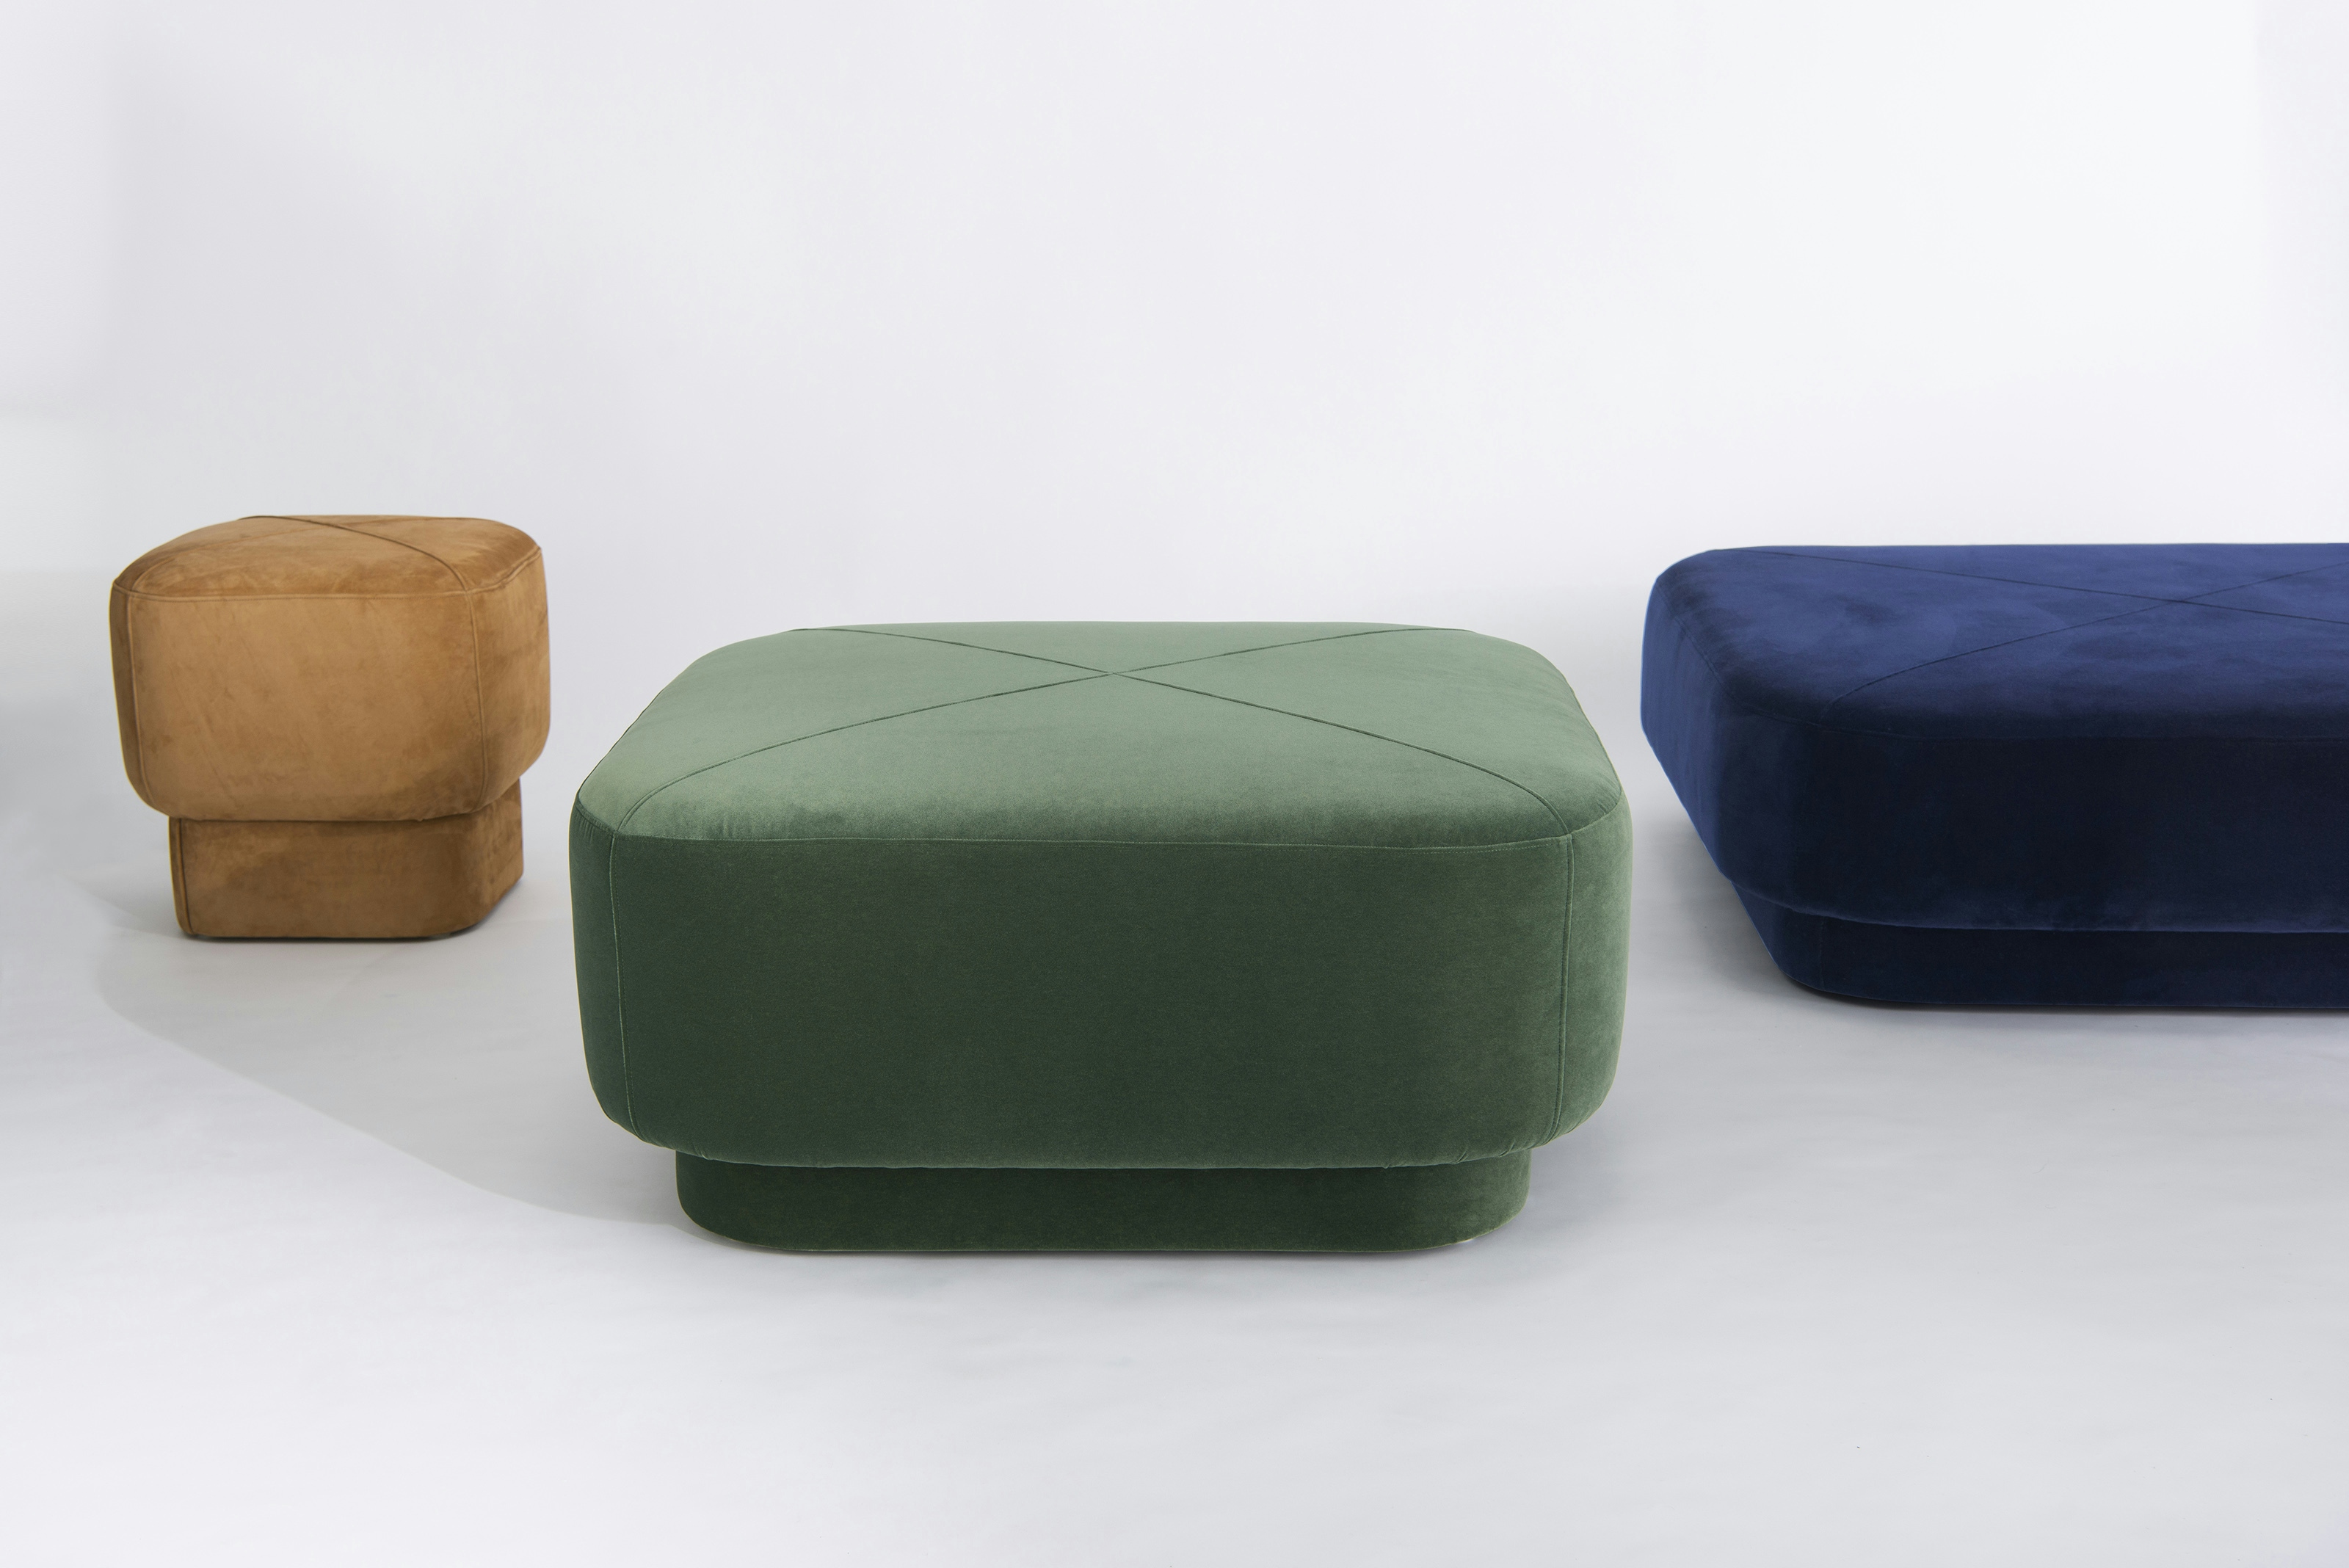 Phase Design Capper Low Stool and Ottomans 1 Web